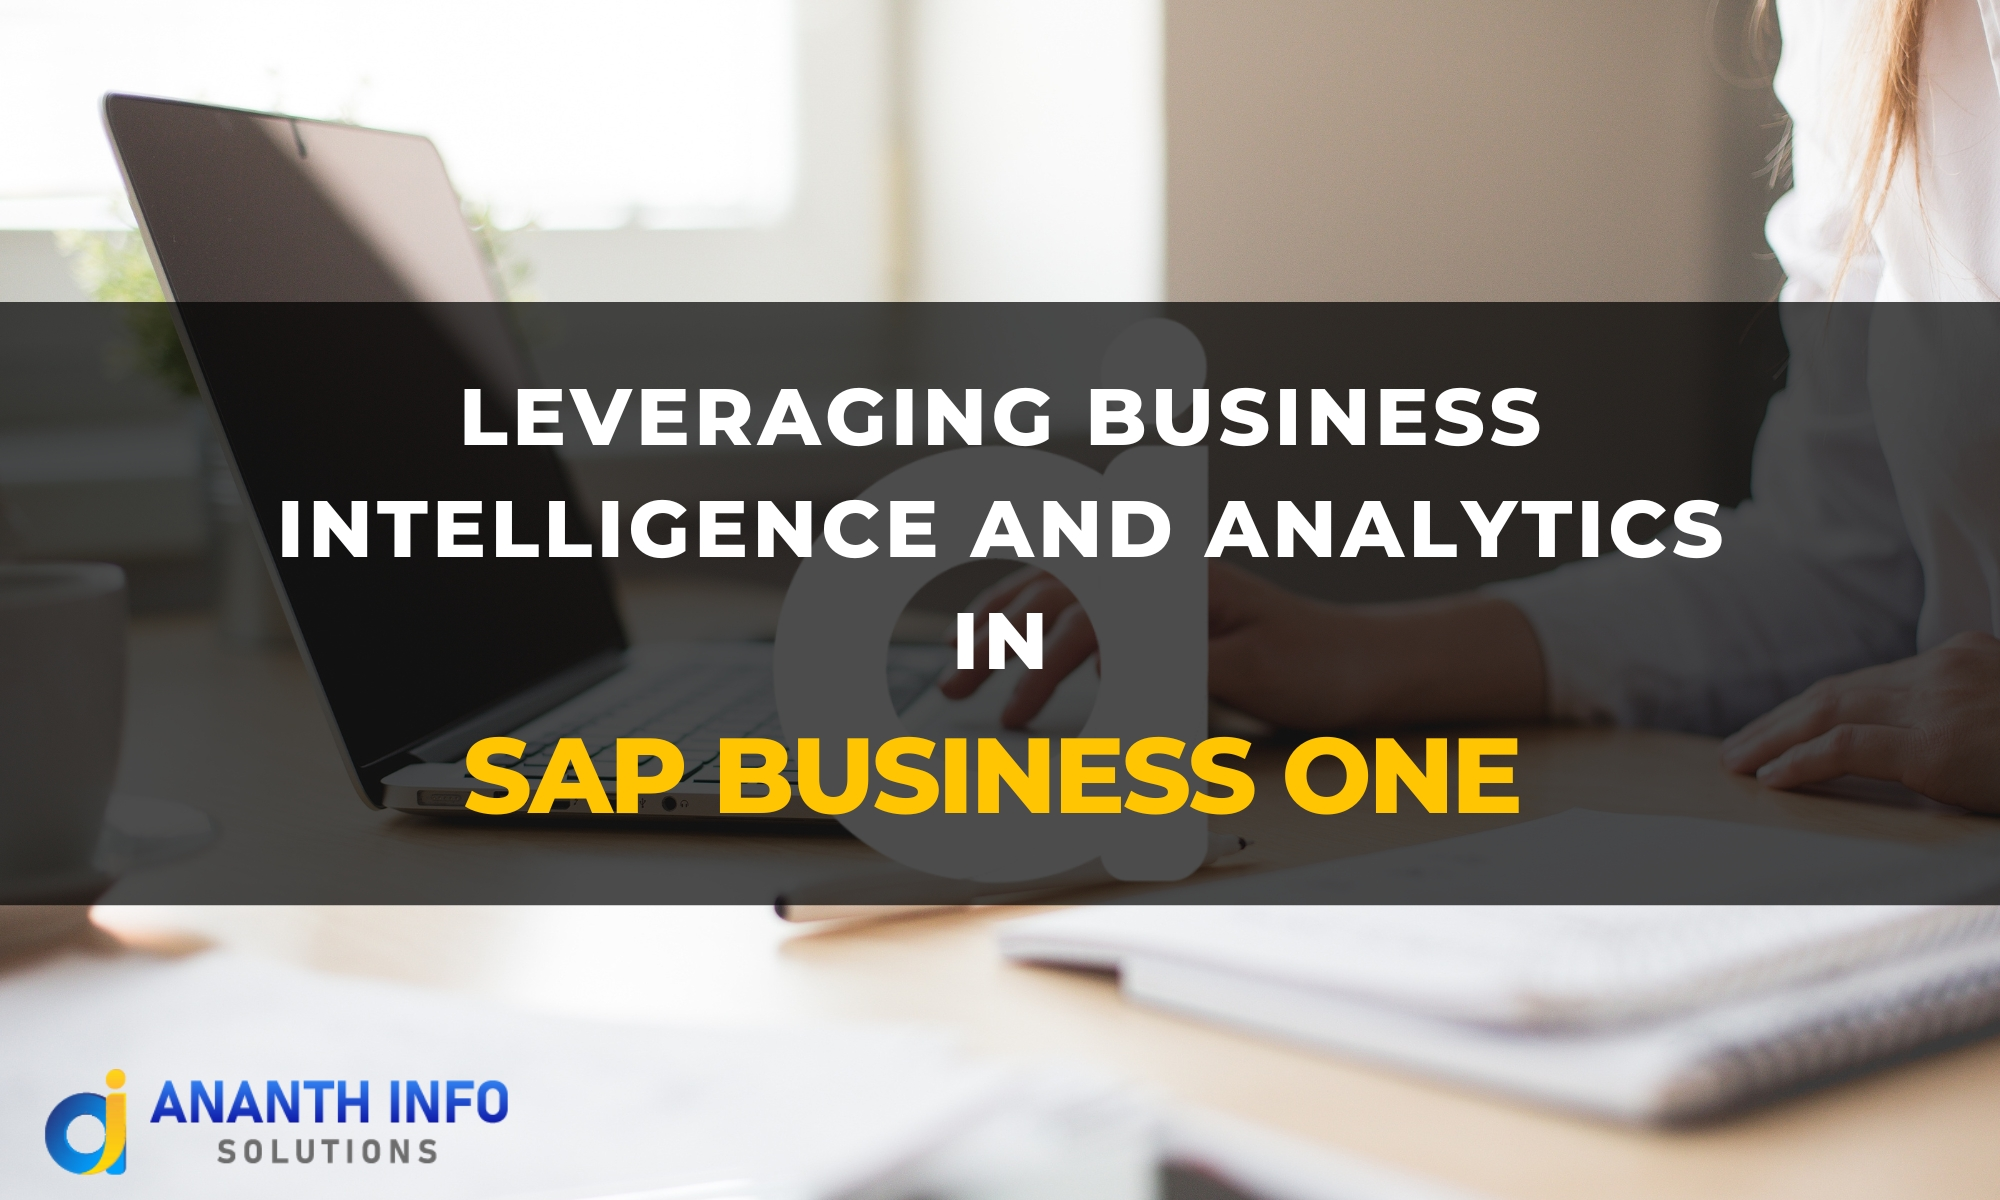 Leveraging Business Intelligence and Analytics in SAP Business One - Ananth Info Solutions